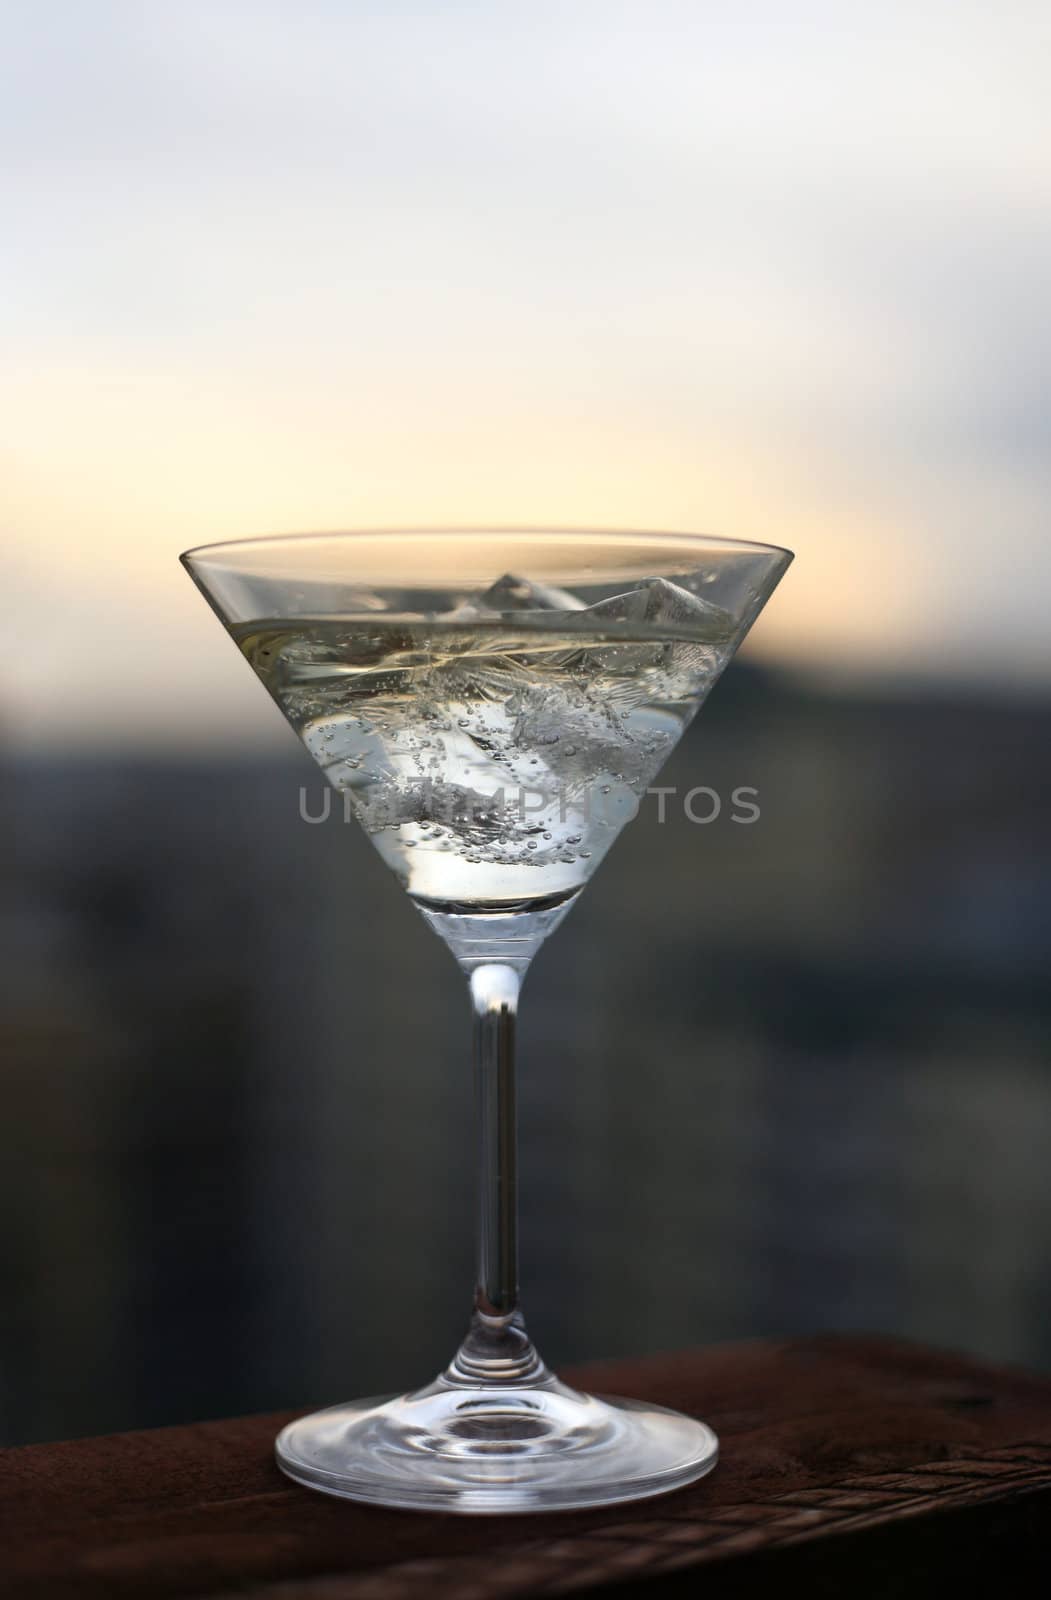 The image of a glass filled with a spirits drink and ice 